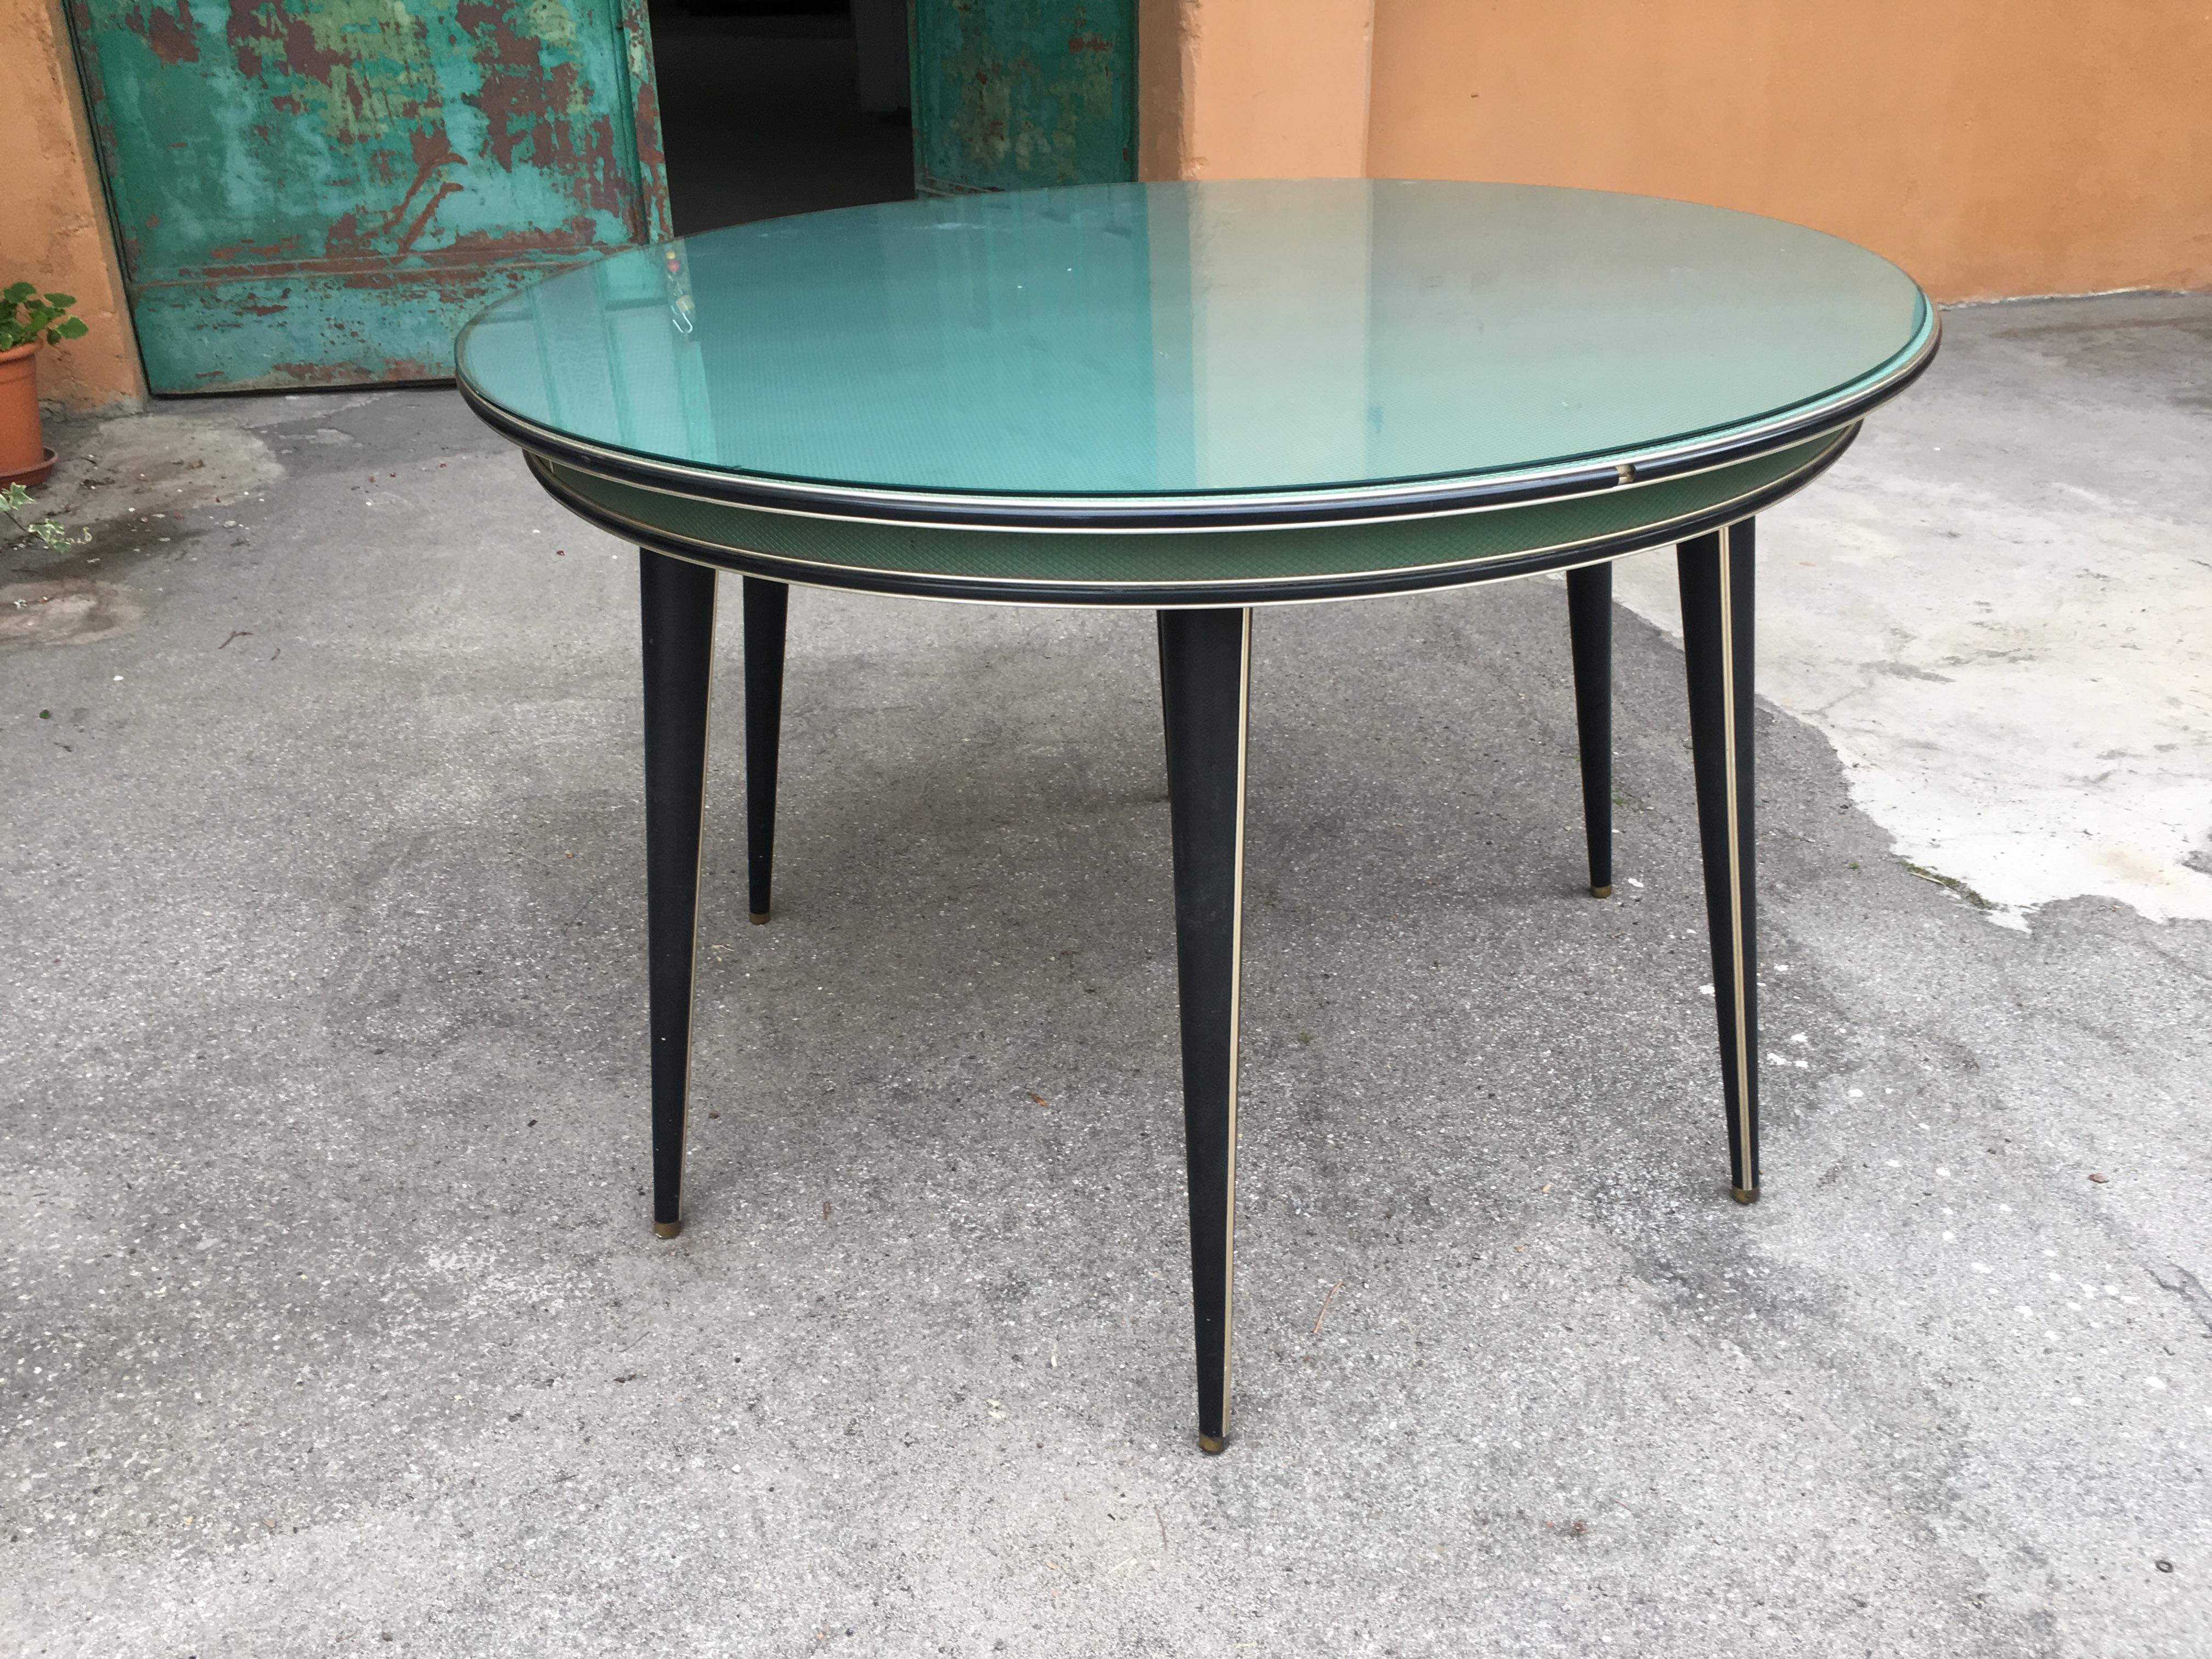 Mid-Century Modern Italian six legs green and black round table by Umberto Mascagni.
The top of the table is in faux leather covered with glass and comes with its protective green cloth cover as shown in the photos.
 